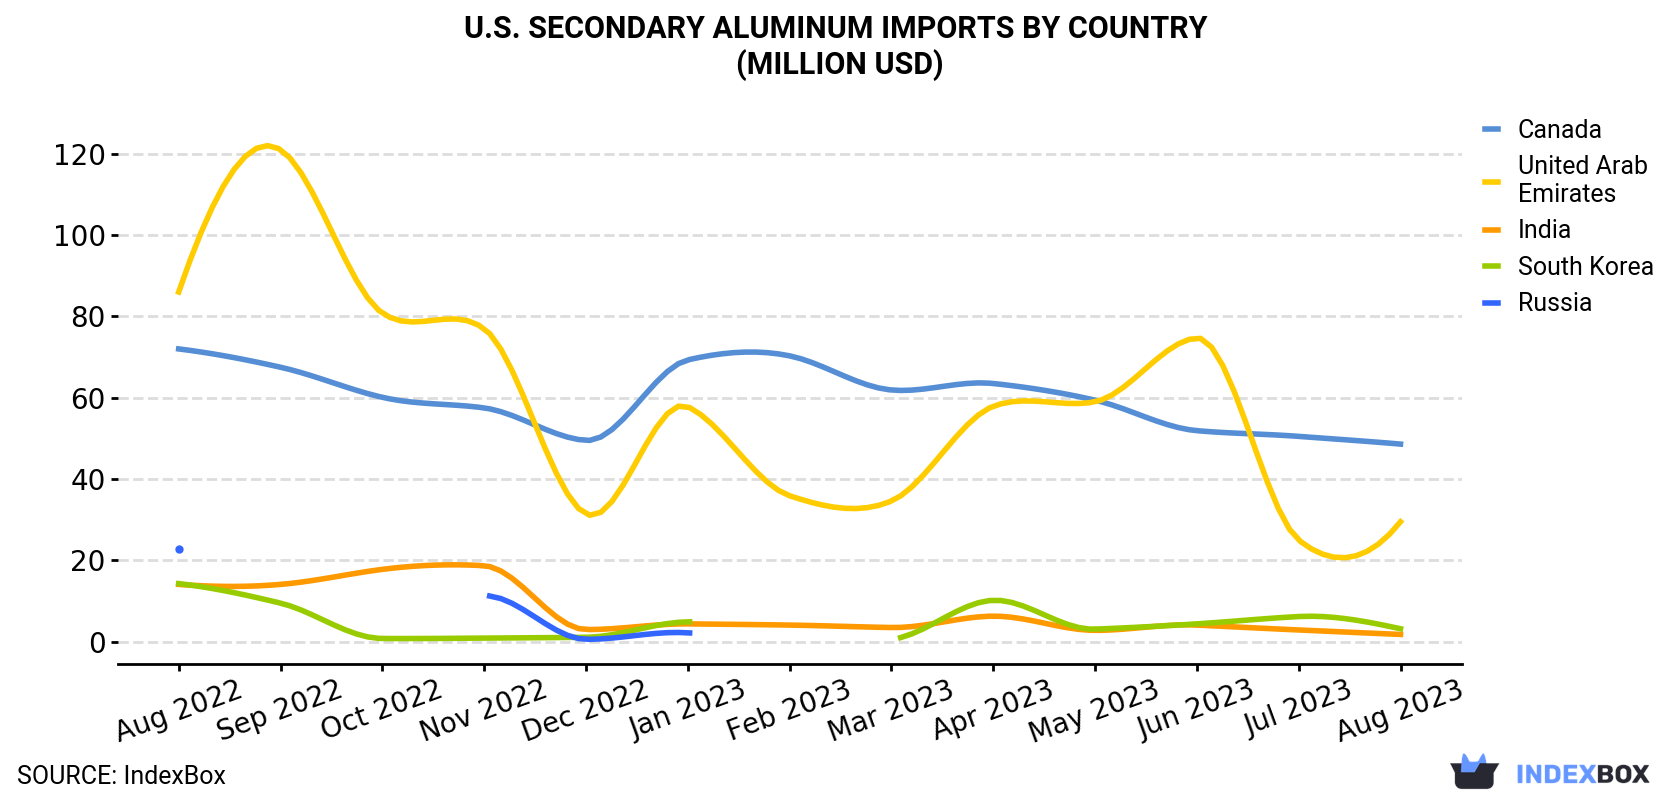 U.S. Secondary Aluminum Imports By Country (Million USD)